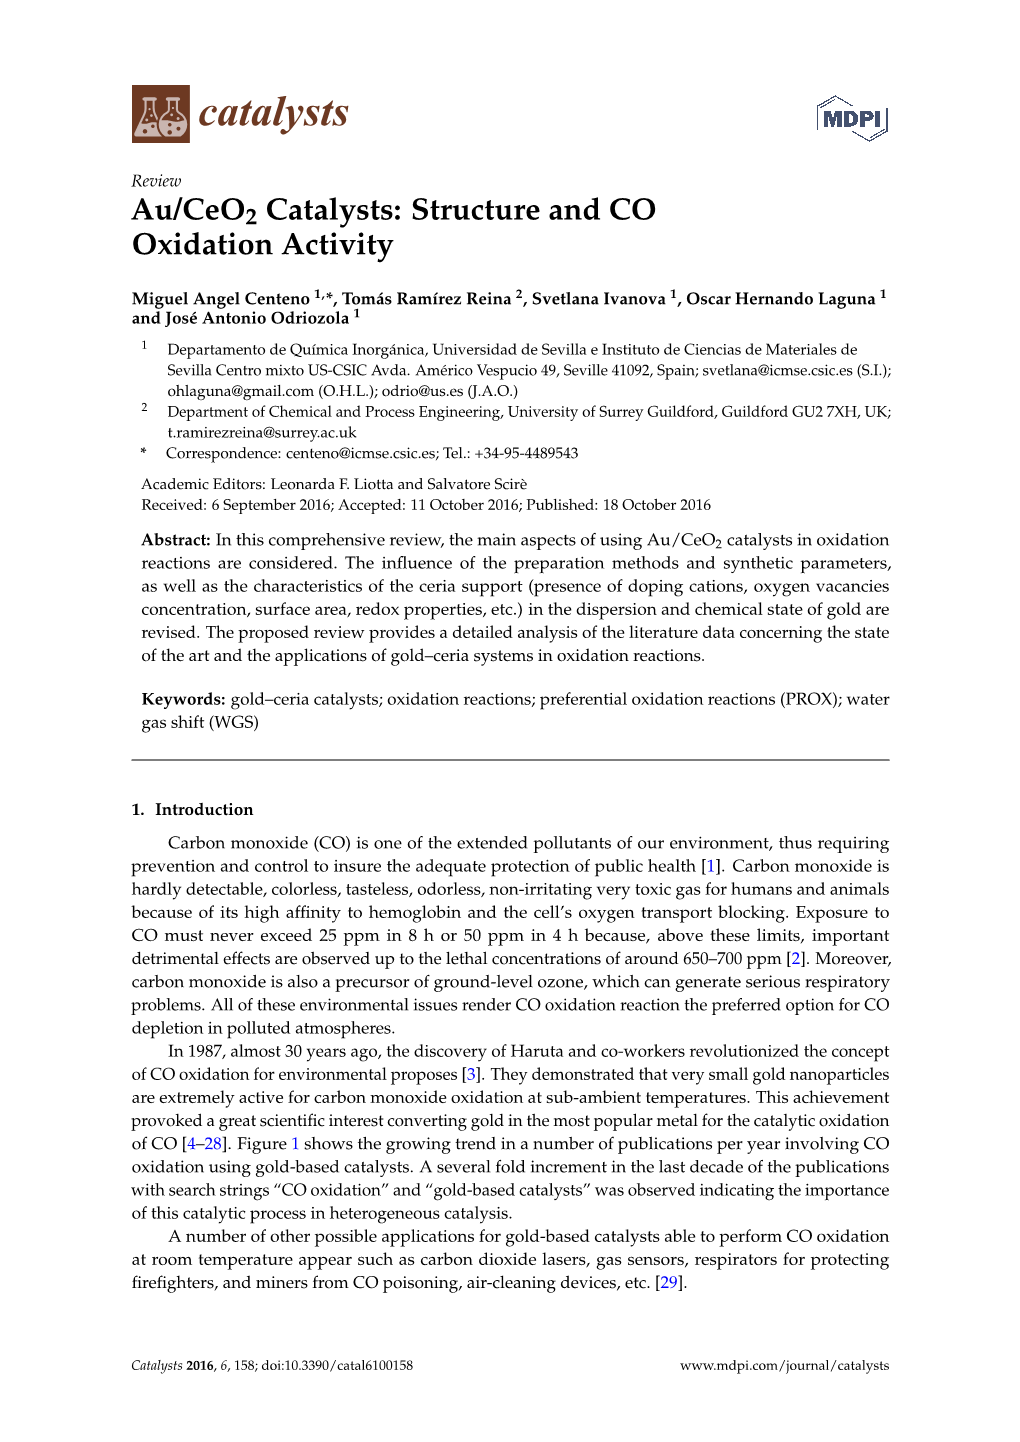 Au/Ceo2 Catalysts: Structure and CO Oxidation Activity